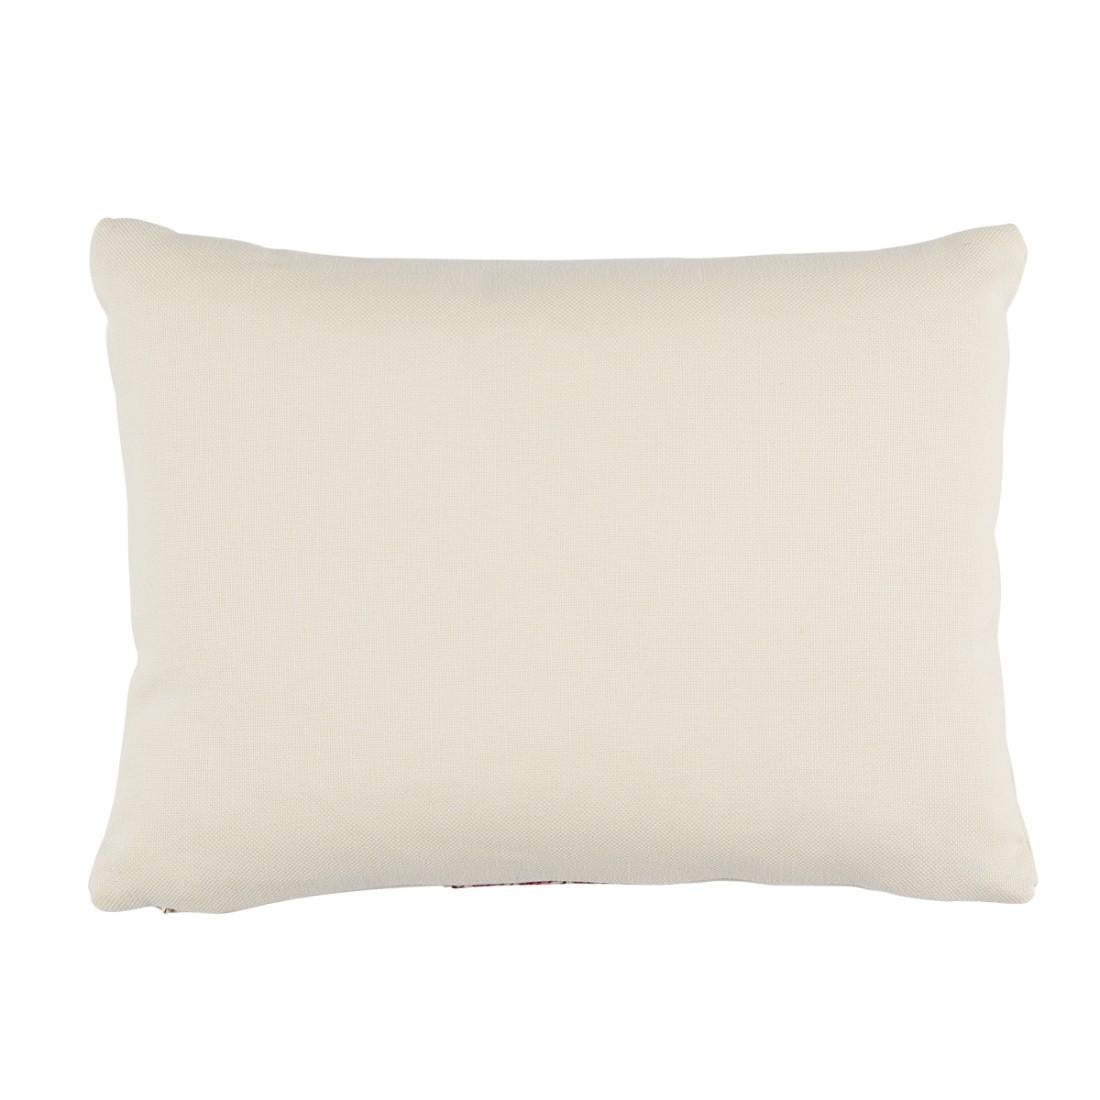 This pillow features Sunrise Embroidery with a knife edge finish. Tiny, irregular, and totally delightful, Sunrise Embroidery Tape’s all-over scallop pattern in blues is embroidered for a whimsical, organic aspect. Body of the pillow is Langham High